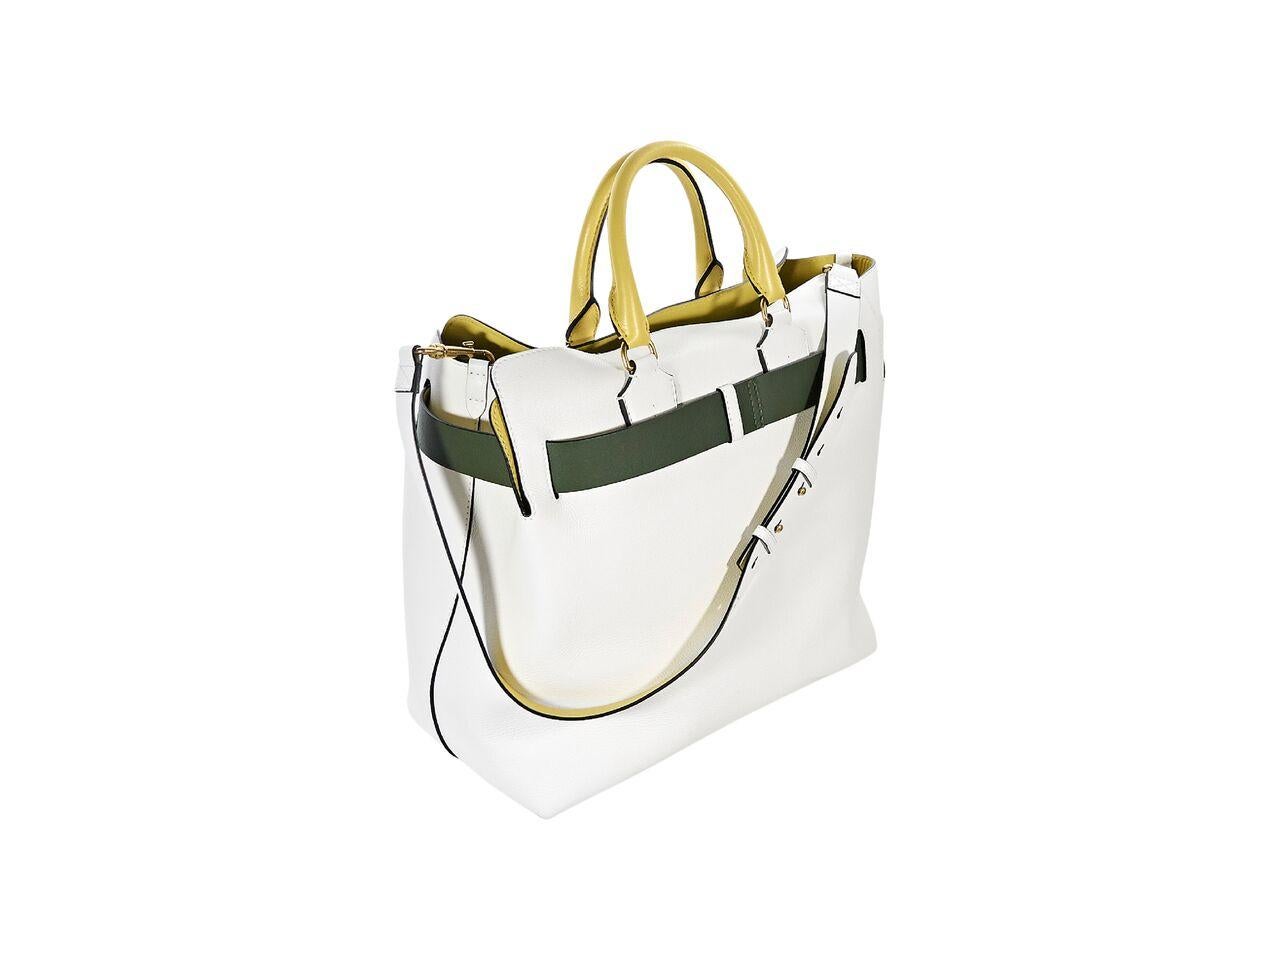 Product details:  Large white leather satchel by Burberry.  Dual yellow carry handles.  Detachable, adjustable shoulder strap.  Open top.  Inner slide pockets.  Removable green and white belt accents.  Protective metal feet.  Goldtone hardware. 